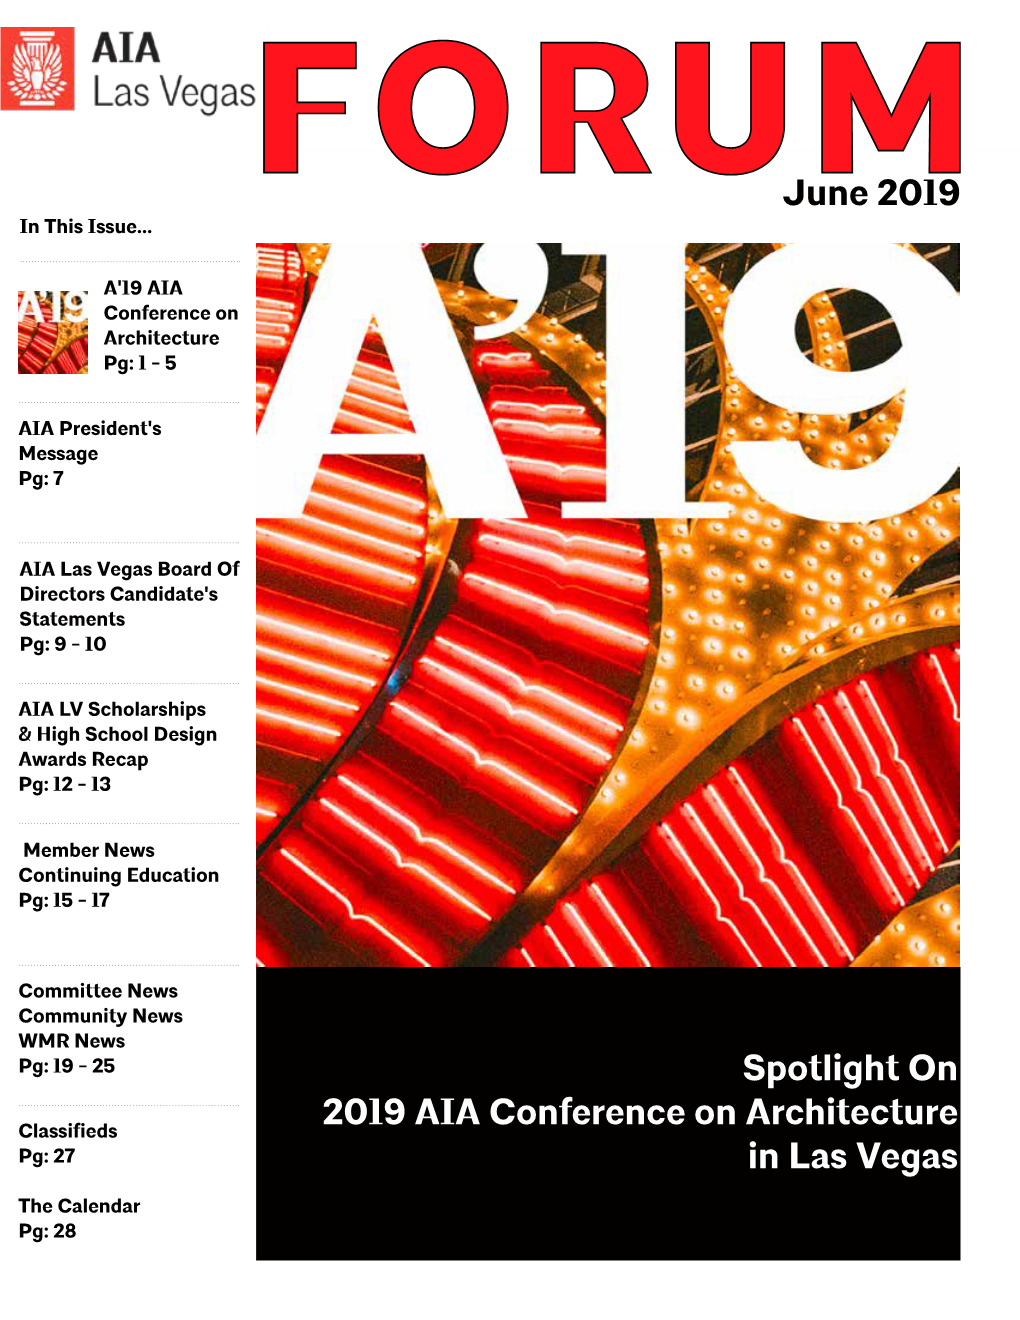 June 2019 Spotlight on 2019 AIA Conference on Architecture in Las